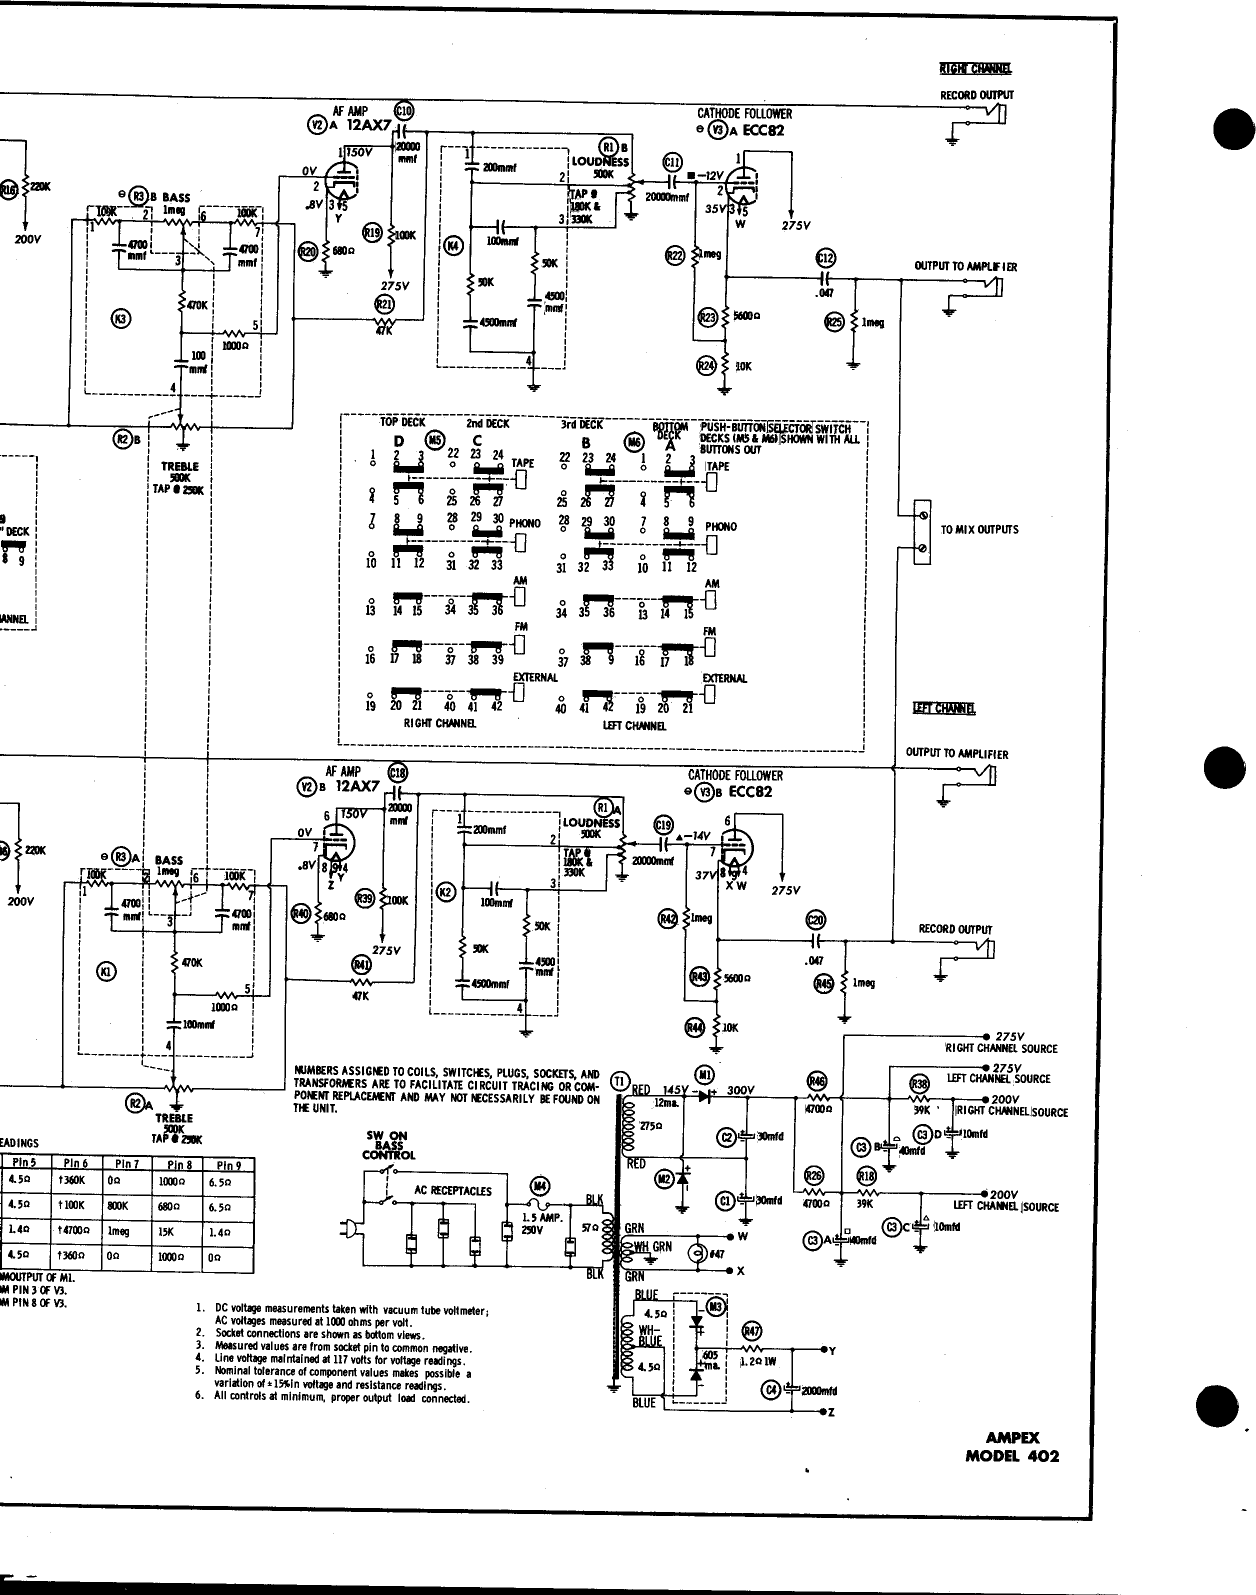 Page 5 of 6 - Ampex-402_preamp Ampex-402 Preamp